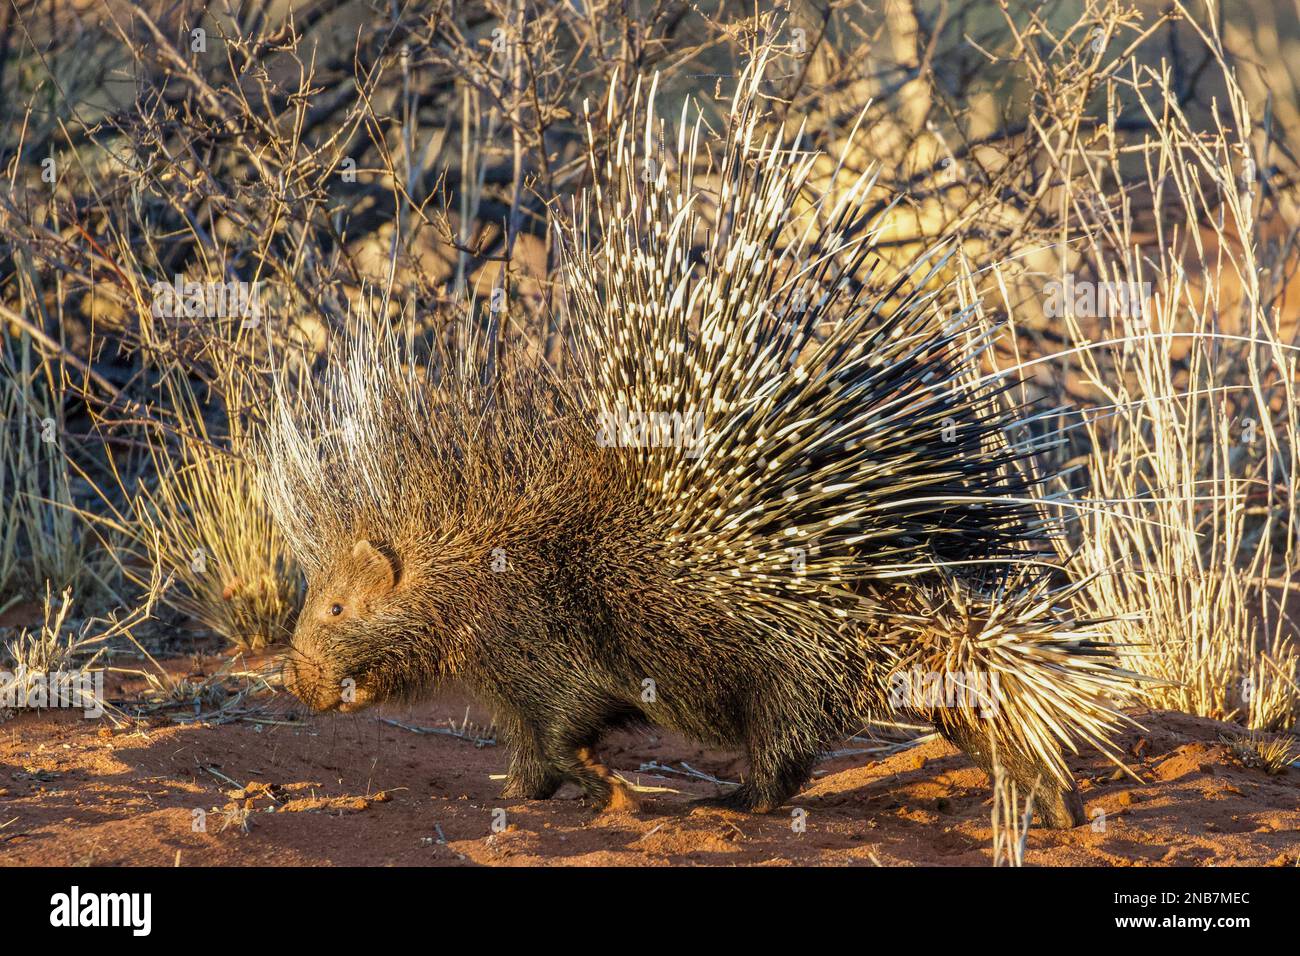 African crested porcupine (Hystrix cristata), or crested porcupine, at South Africa's Tswalu Private Game Reserve in the Kalahari desert. Stock Photo